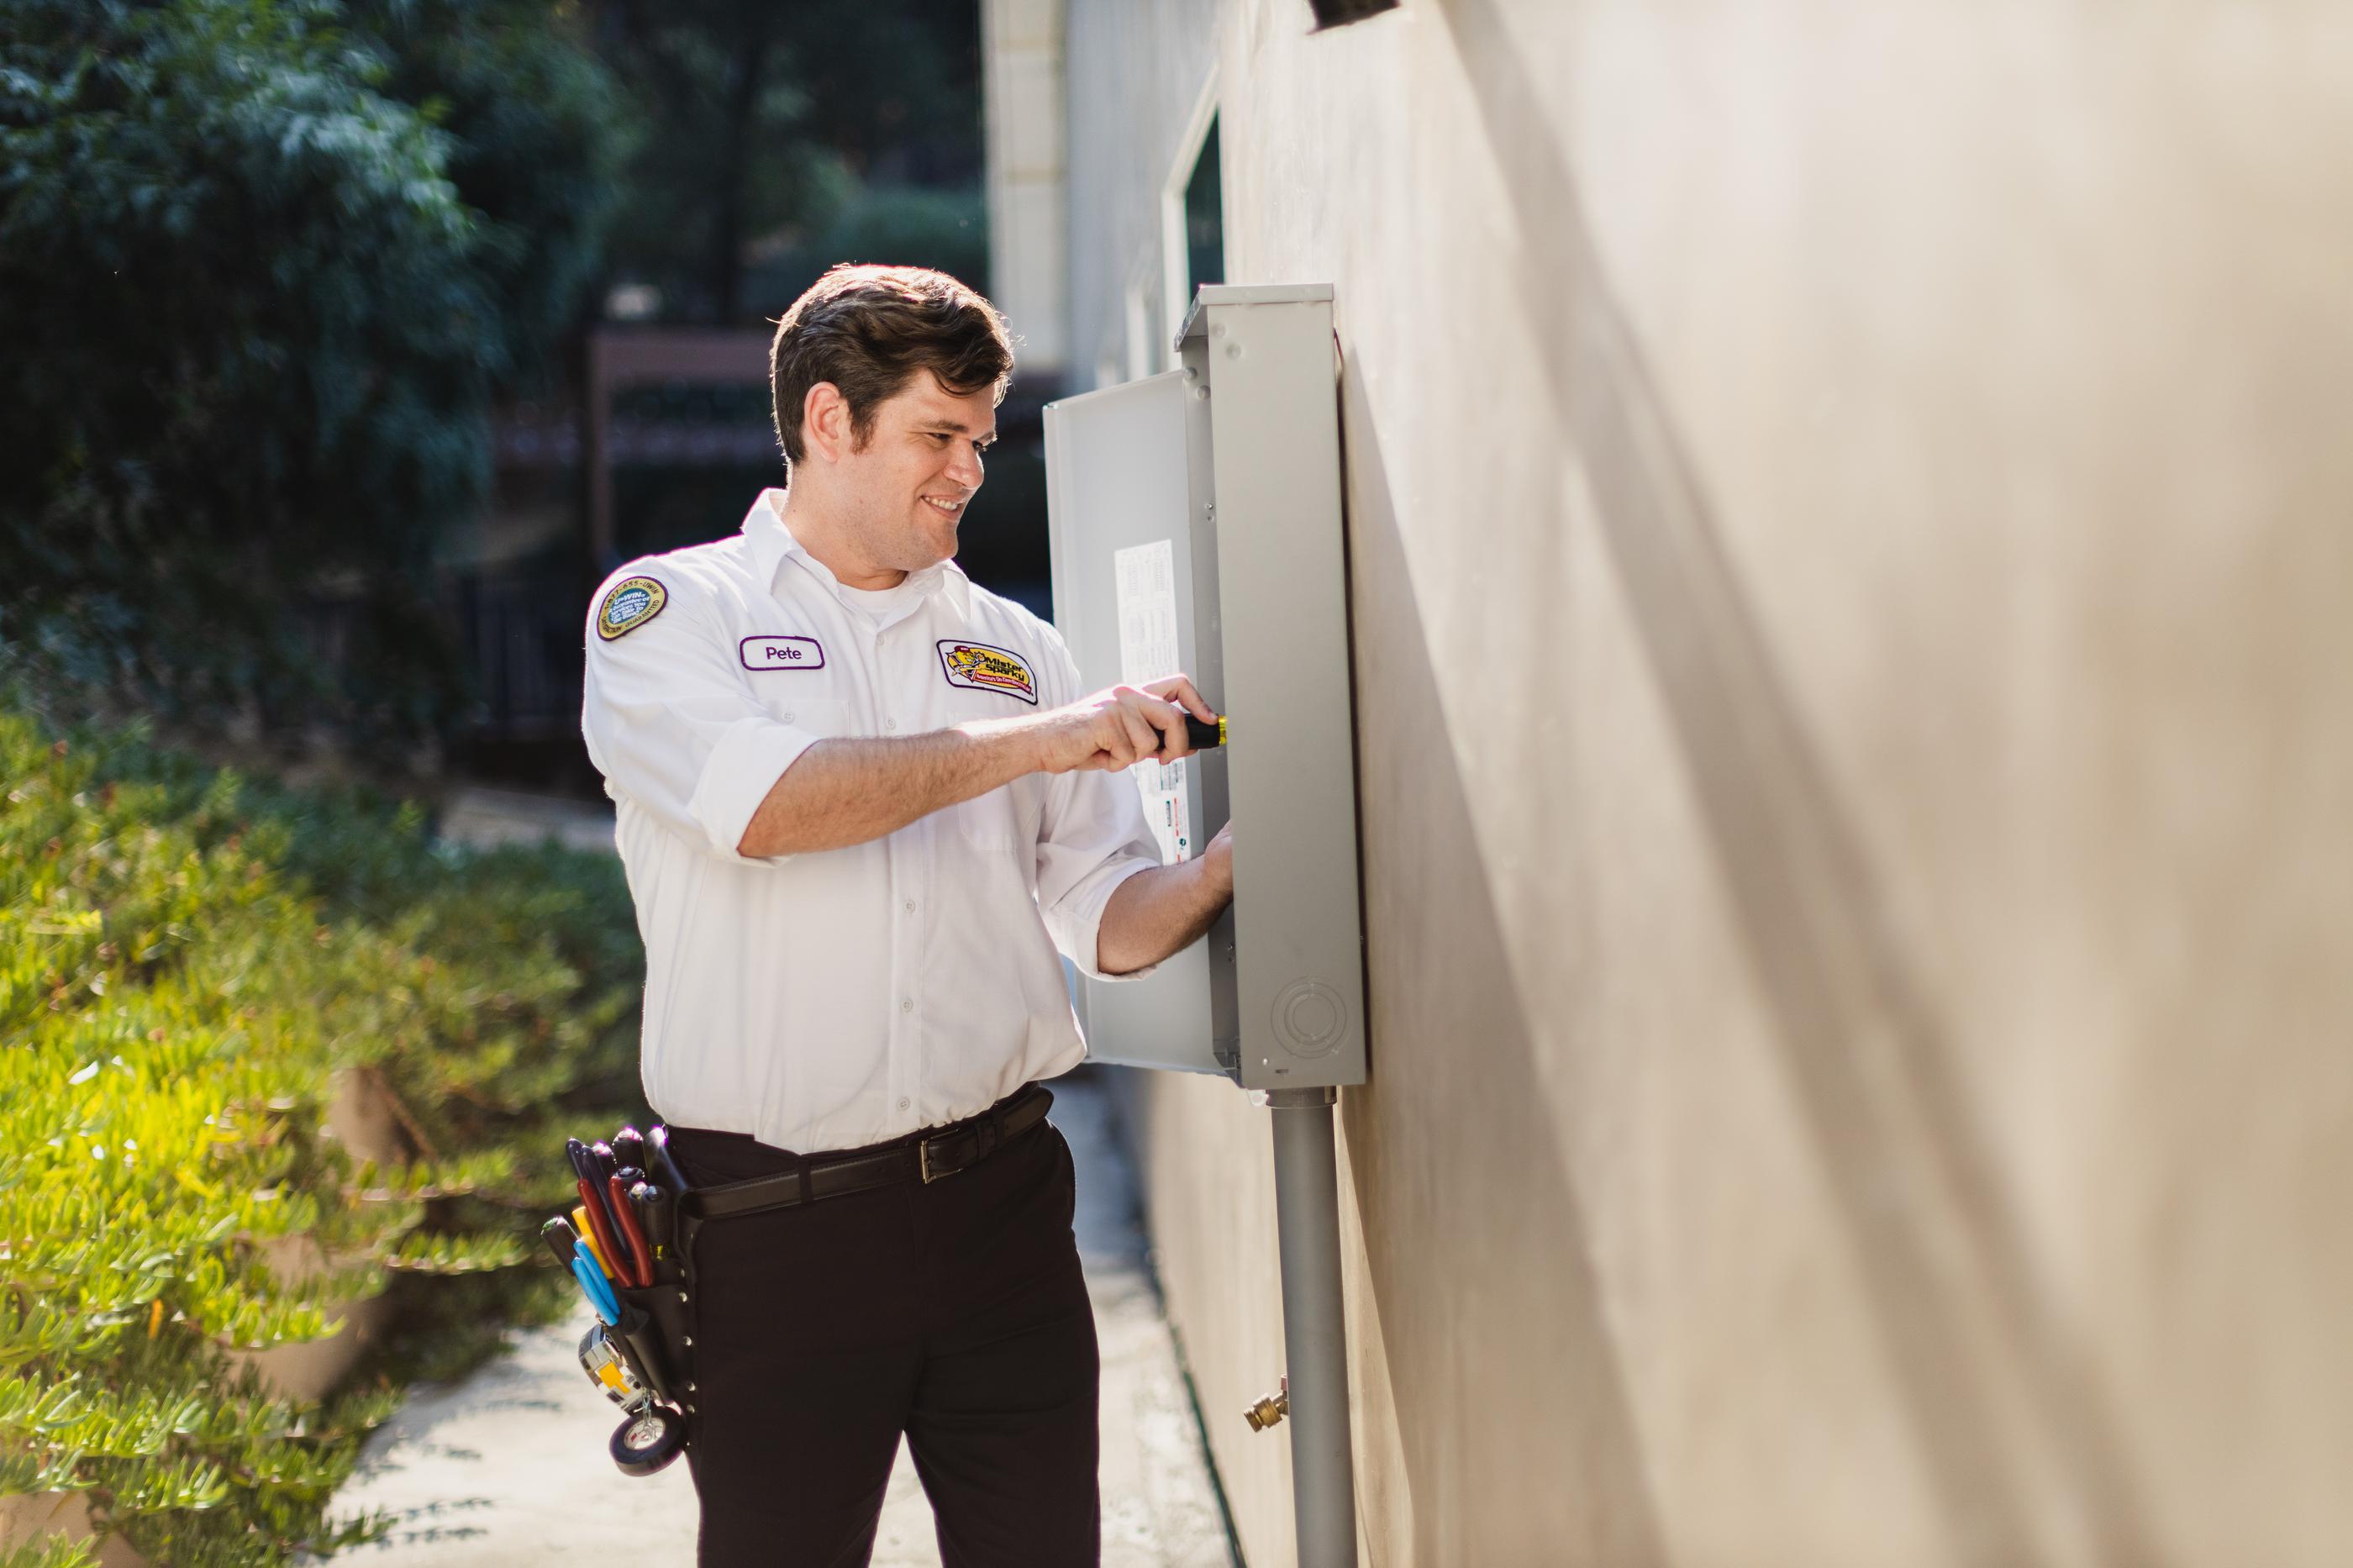 How Often Should Electrical Panels Be Inspected?